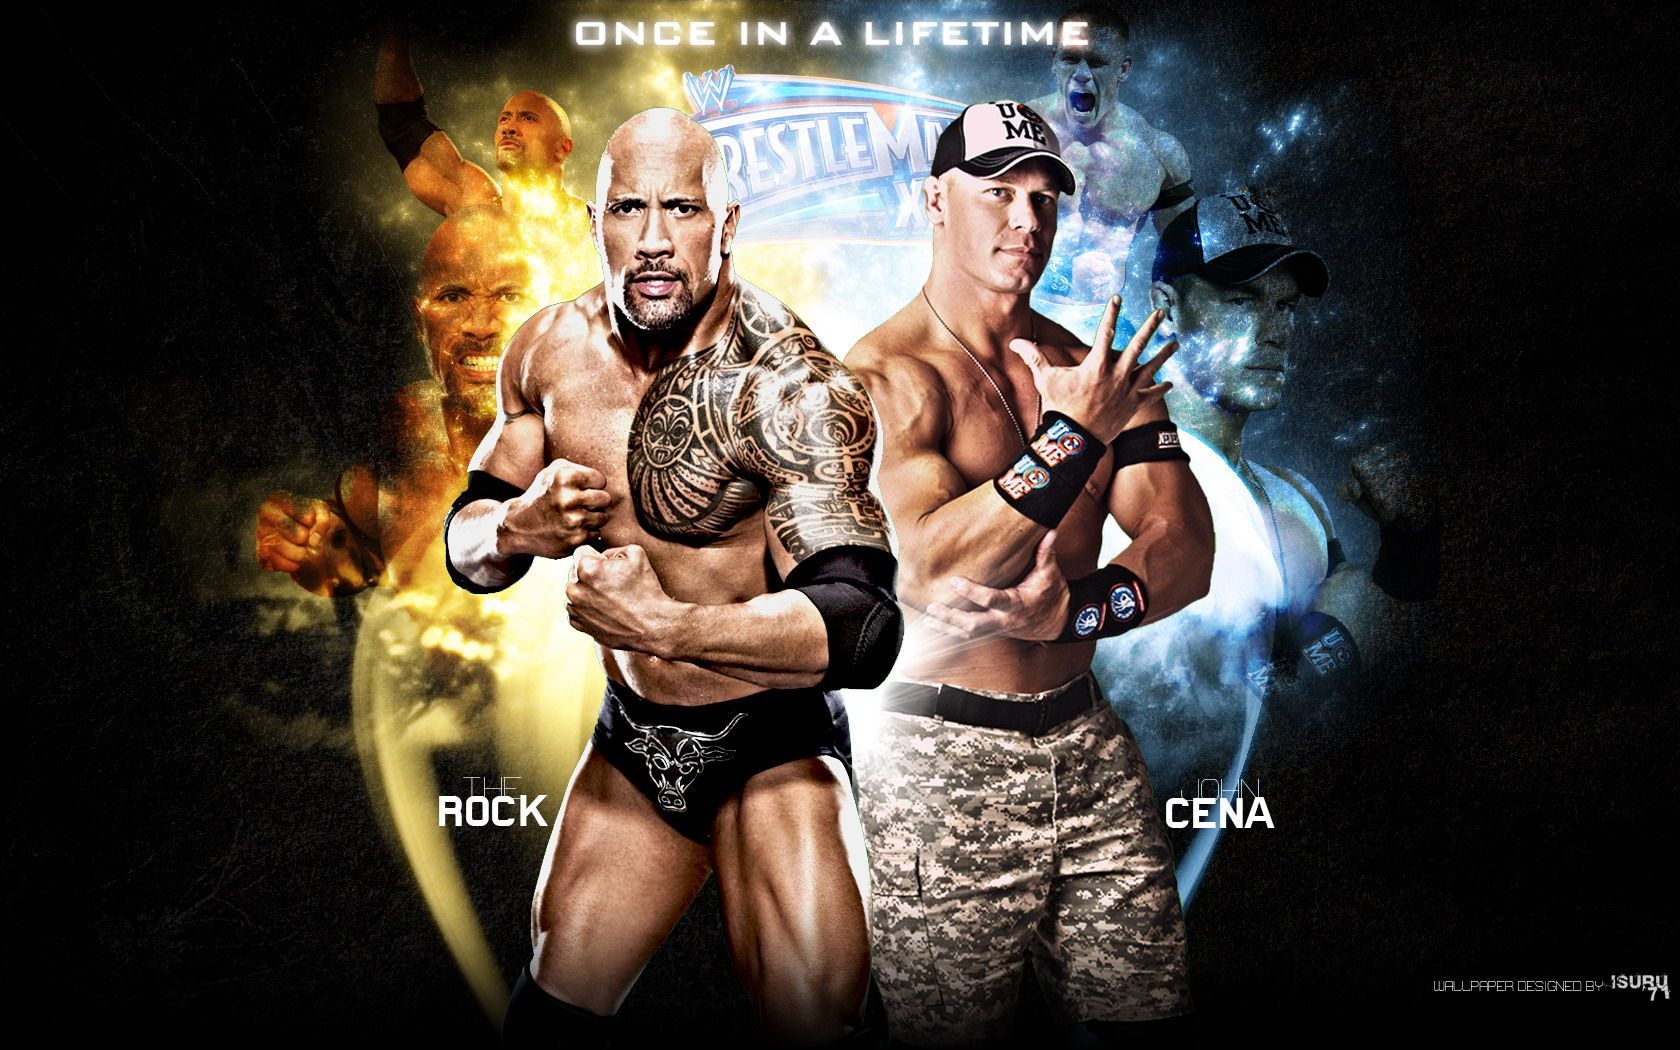 John Cena Wwe The Rock Vs Once In A Lifetime Your Top HD Wallpaper #ID67949